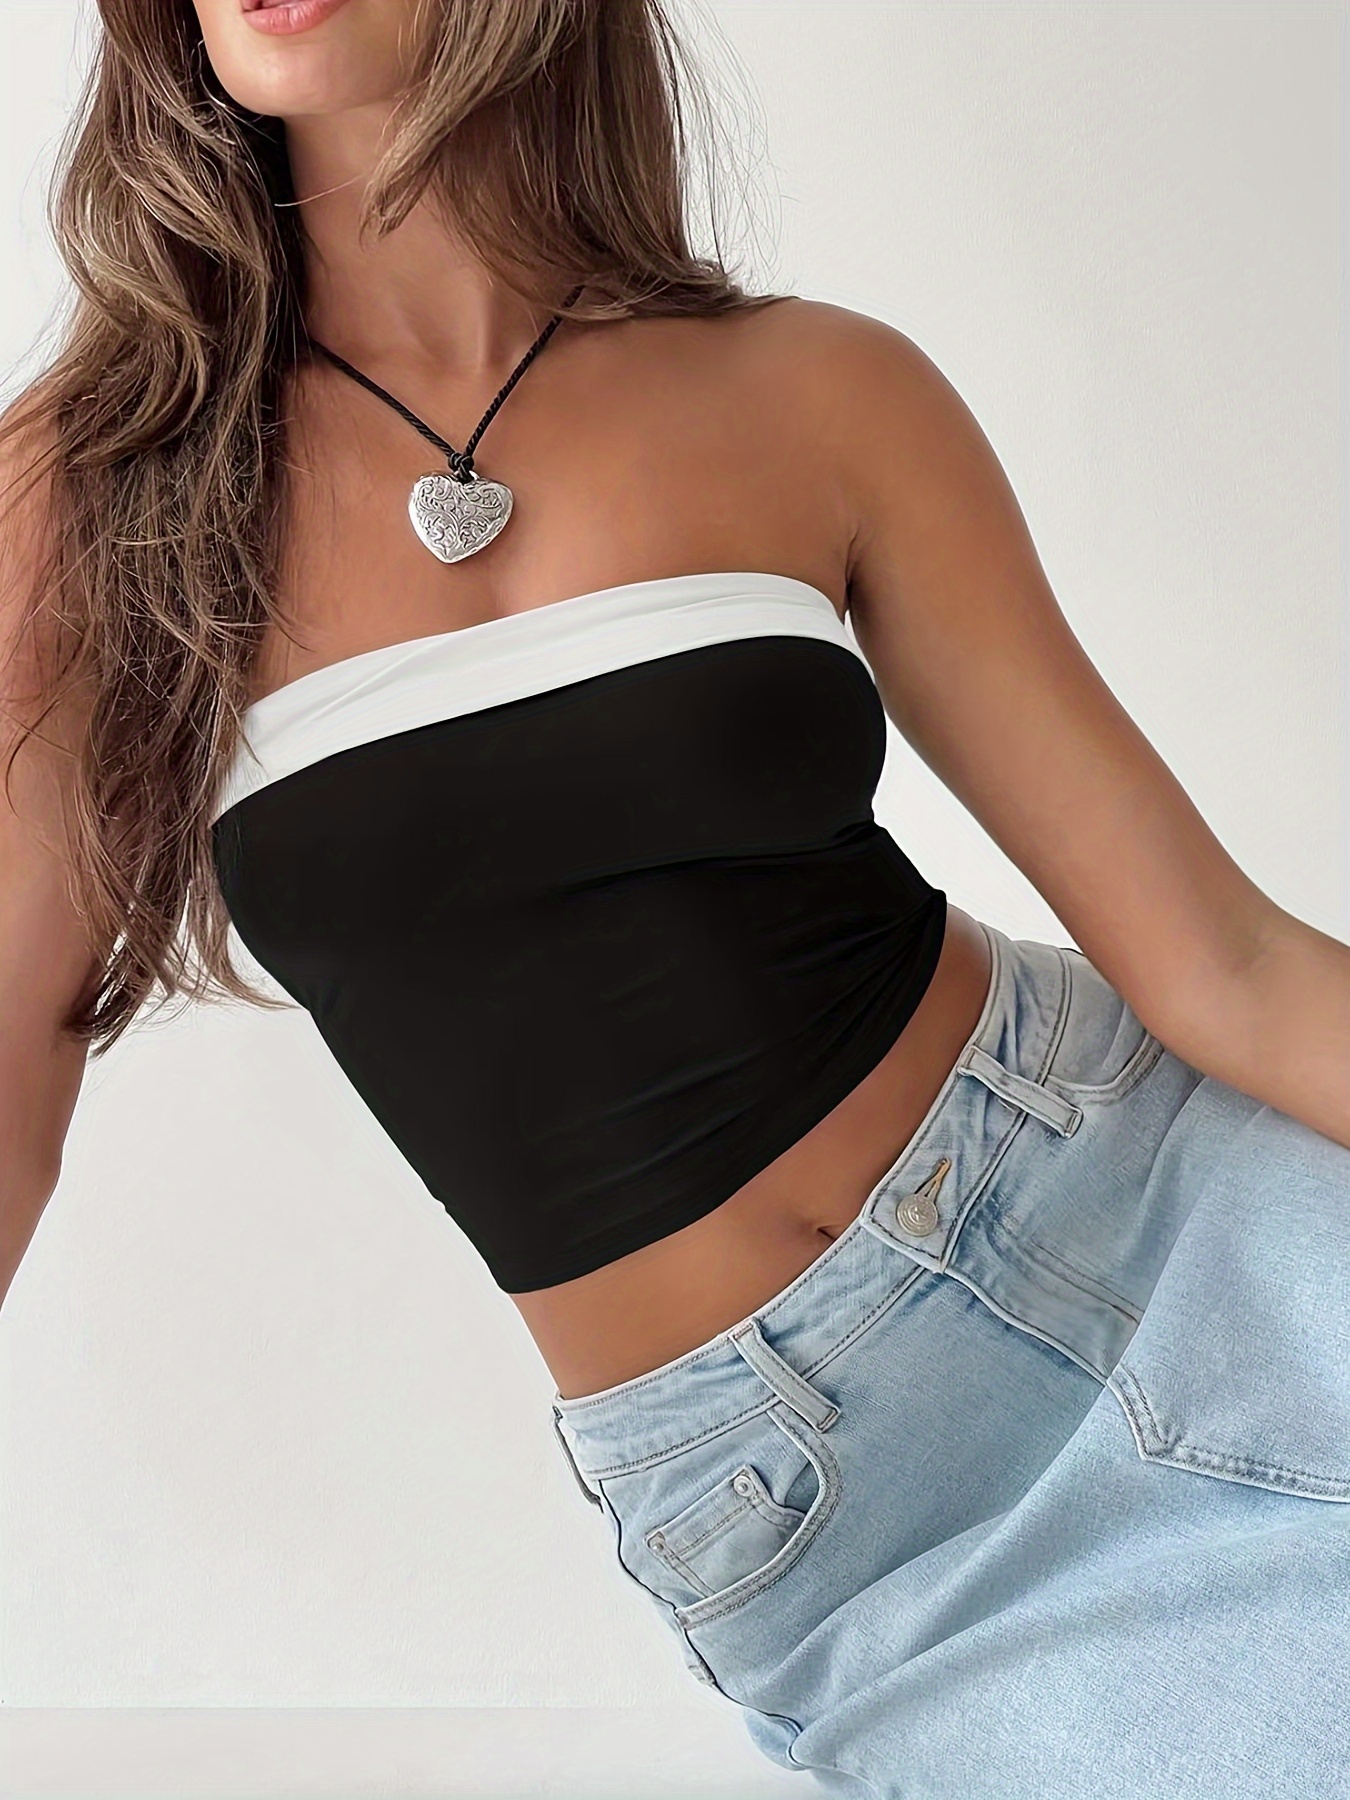 Black Crop Tube Top, Cropped Tube Top, Crop Tops for Women